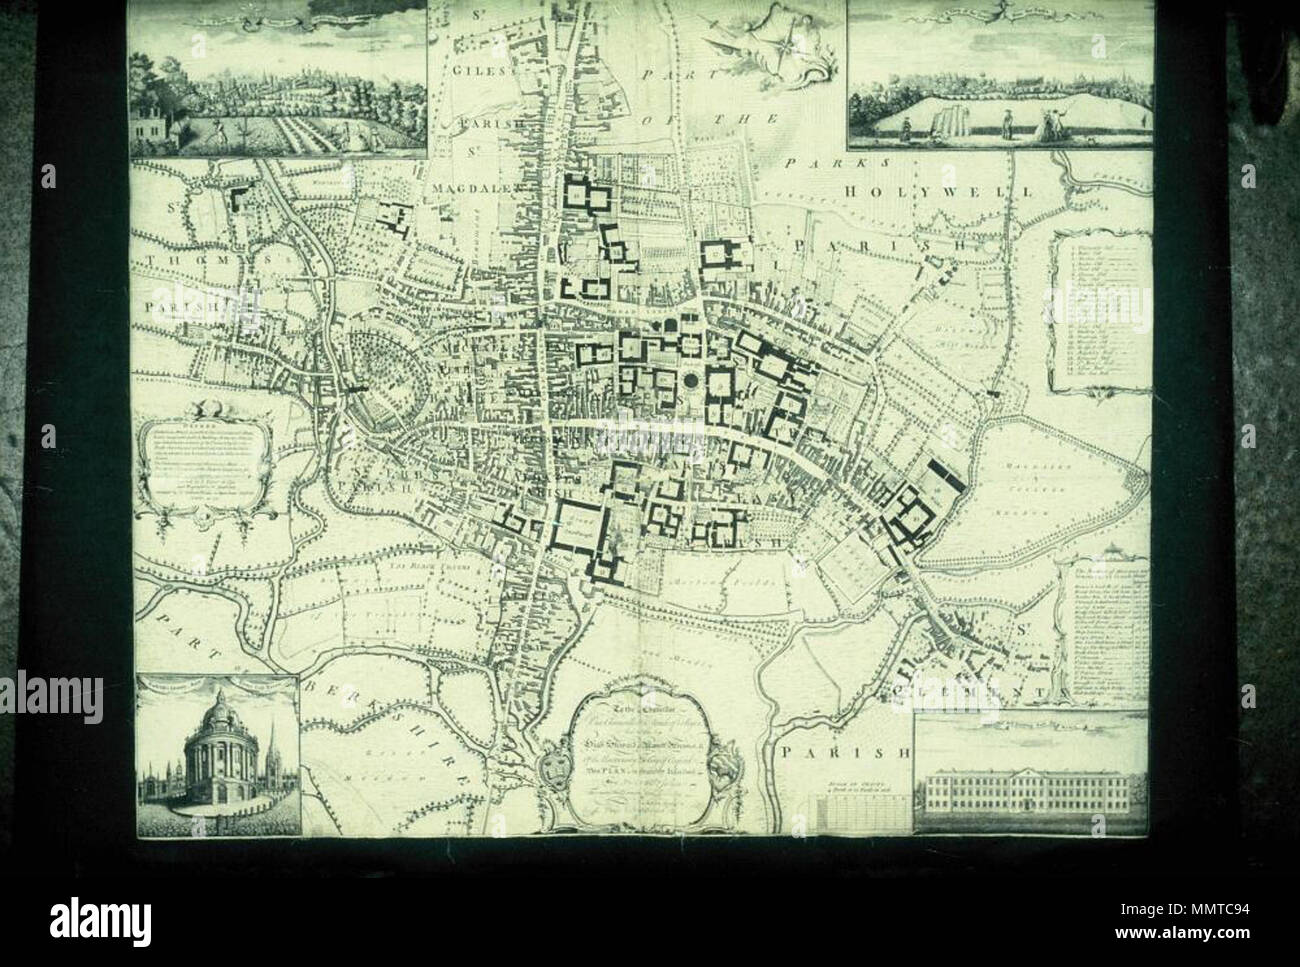 . Oxford, mid-18th century, with many medieval features. Surveyed by Isaac Taylor, engraved by George Anderton and published by William Jackson. Scale c.1: 2,400; Image 1  [Plan of the University and City of Oxford]. 1751. Bodleian Libraries, Plan of the University and City of Oxford Image 1 Stock Photo